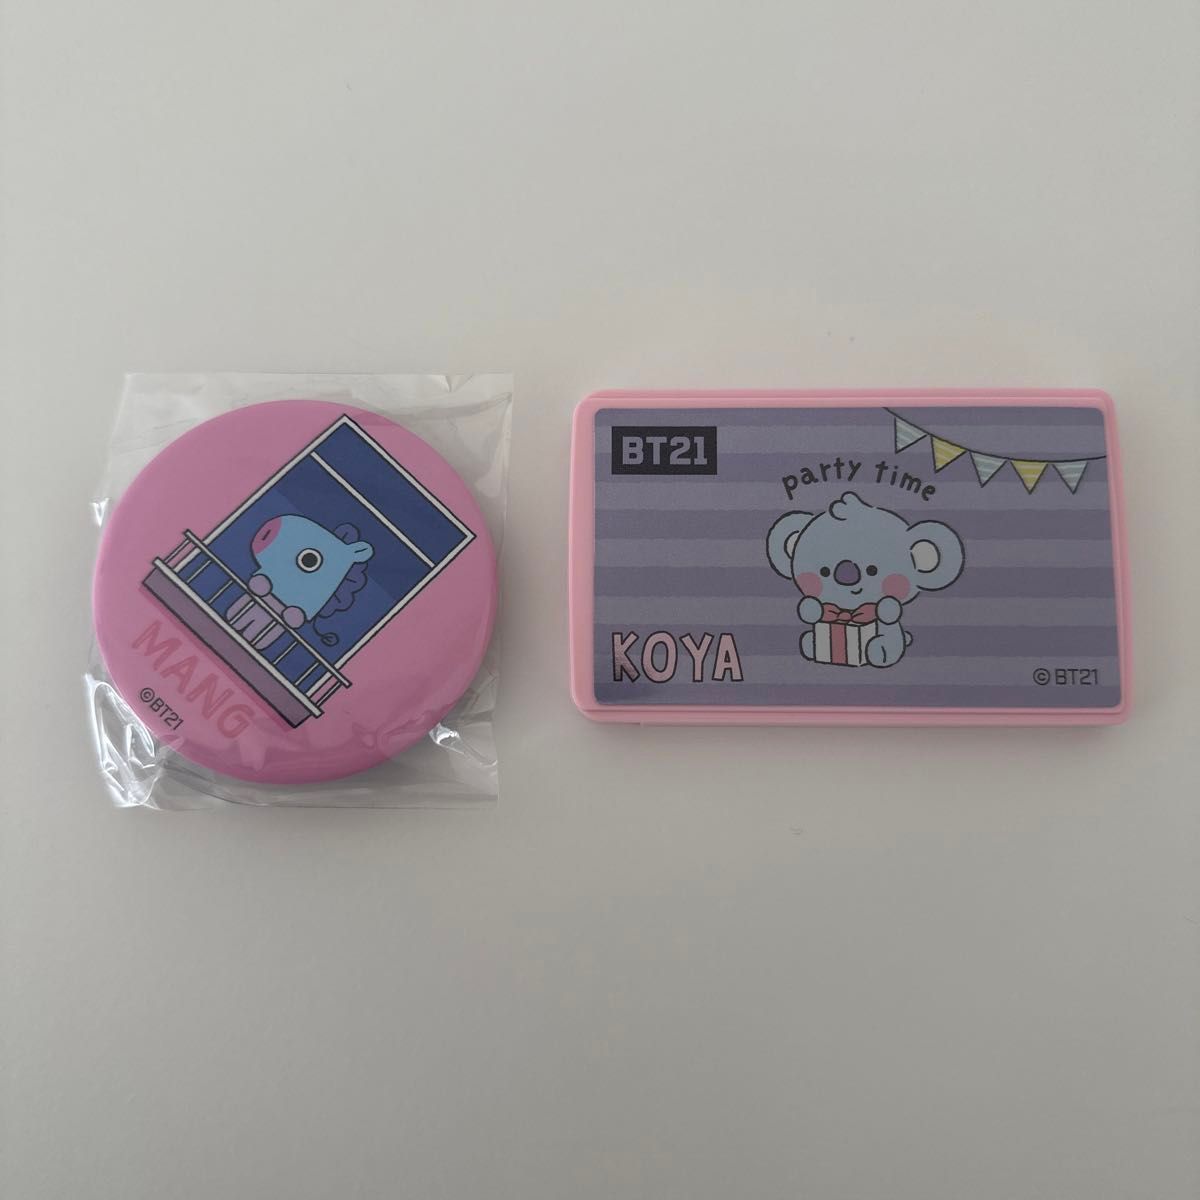 BT21 缶バッジ　まとめ売り